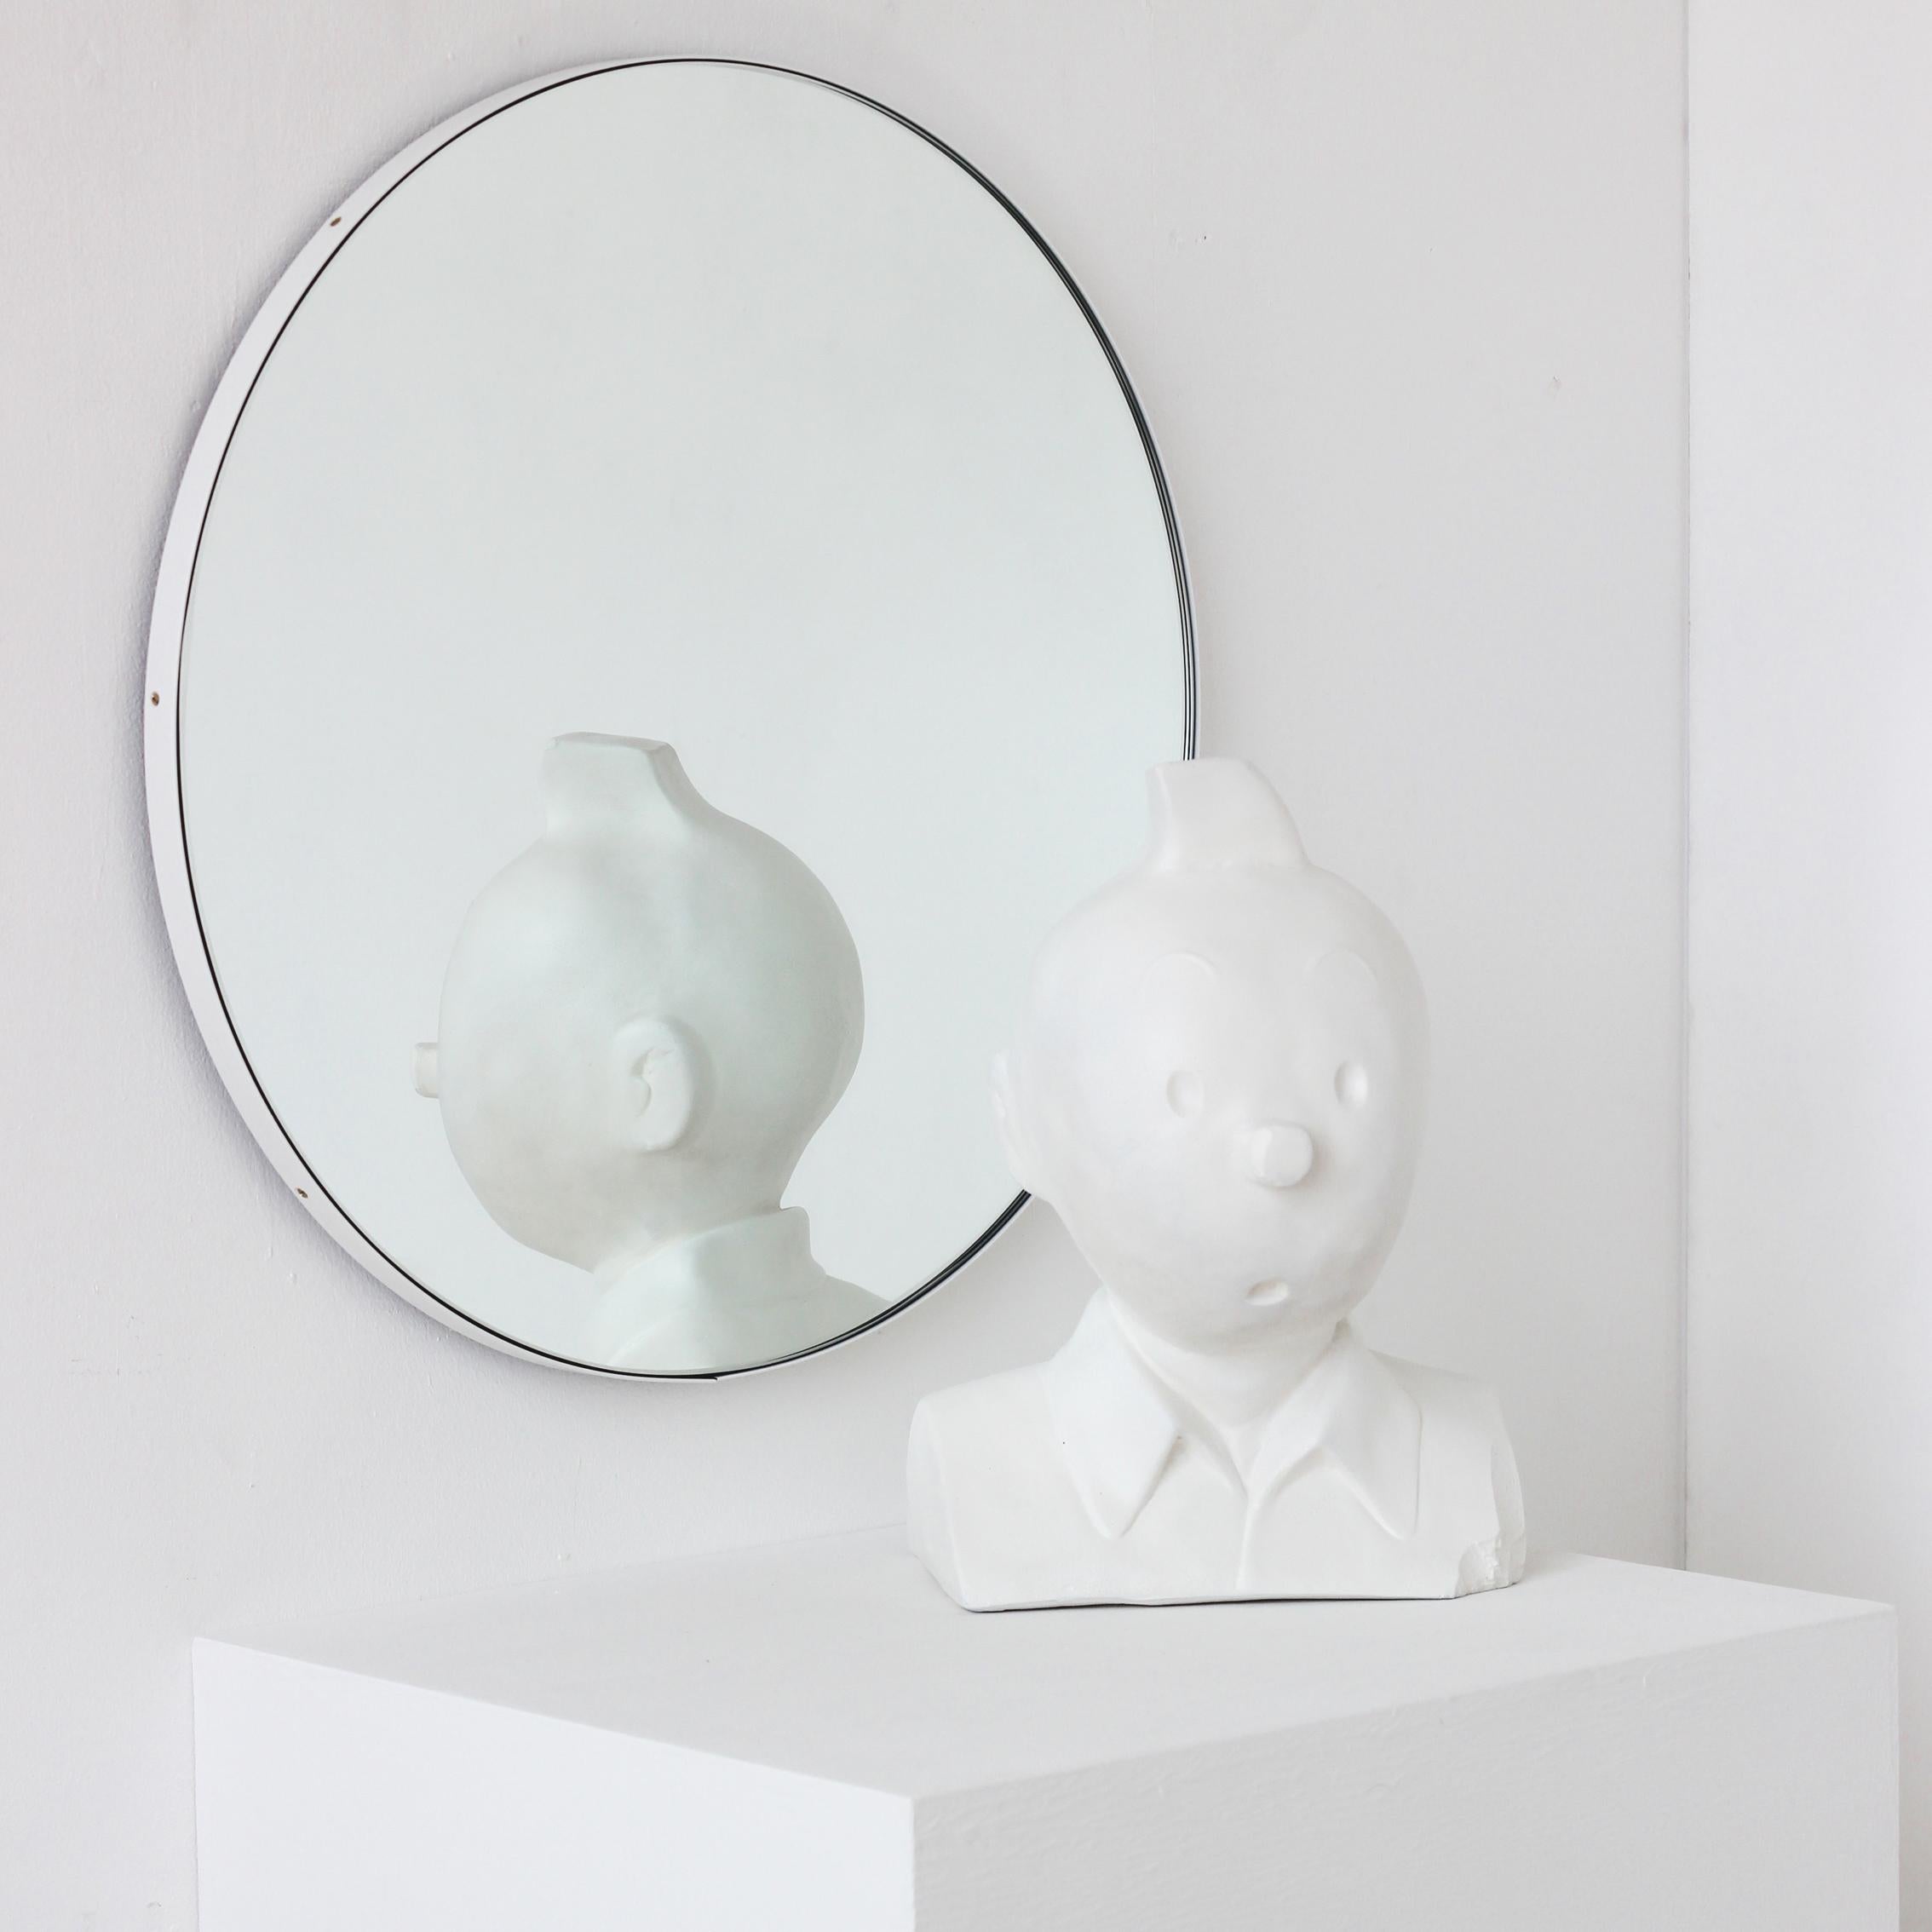 Orbis Round Contemporary Custom Mirror with White Frame, Medium In New Condition For Sale In London, GB